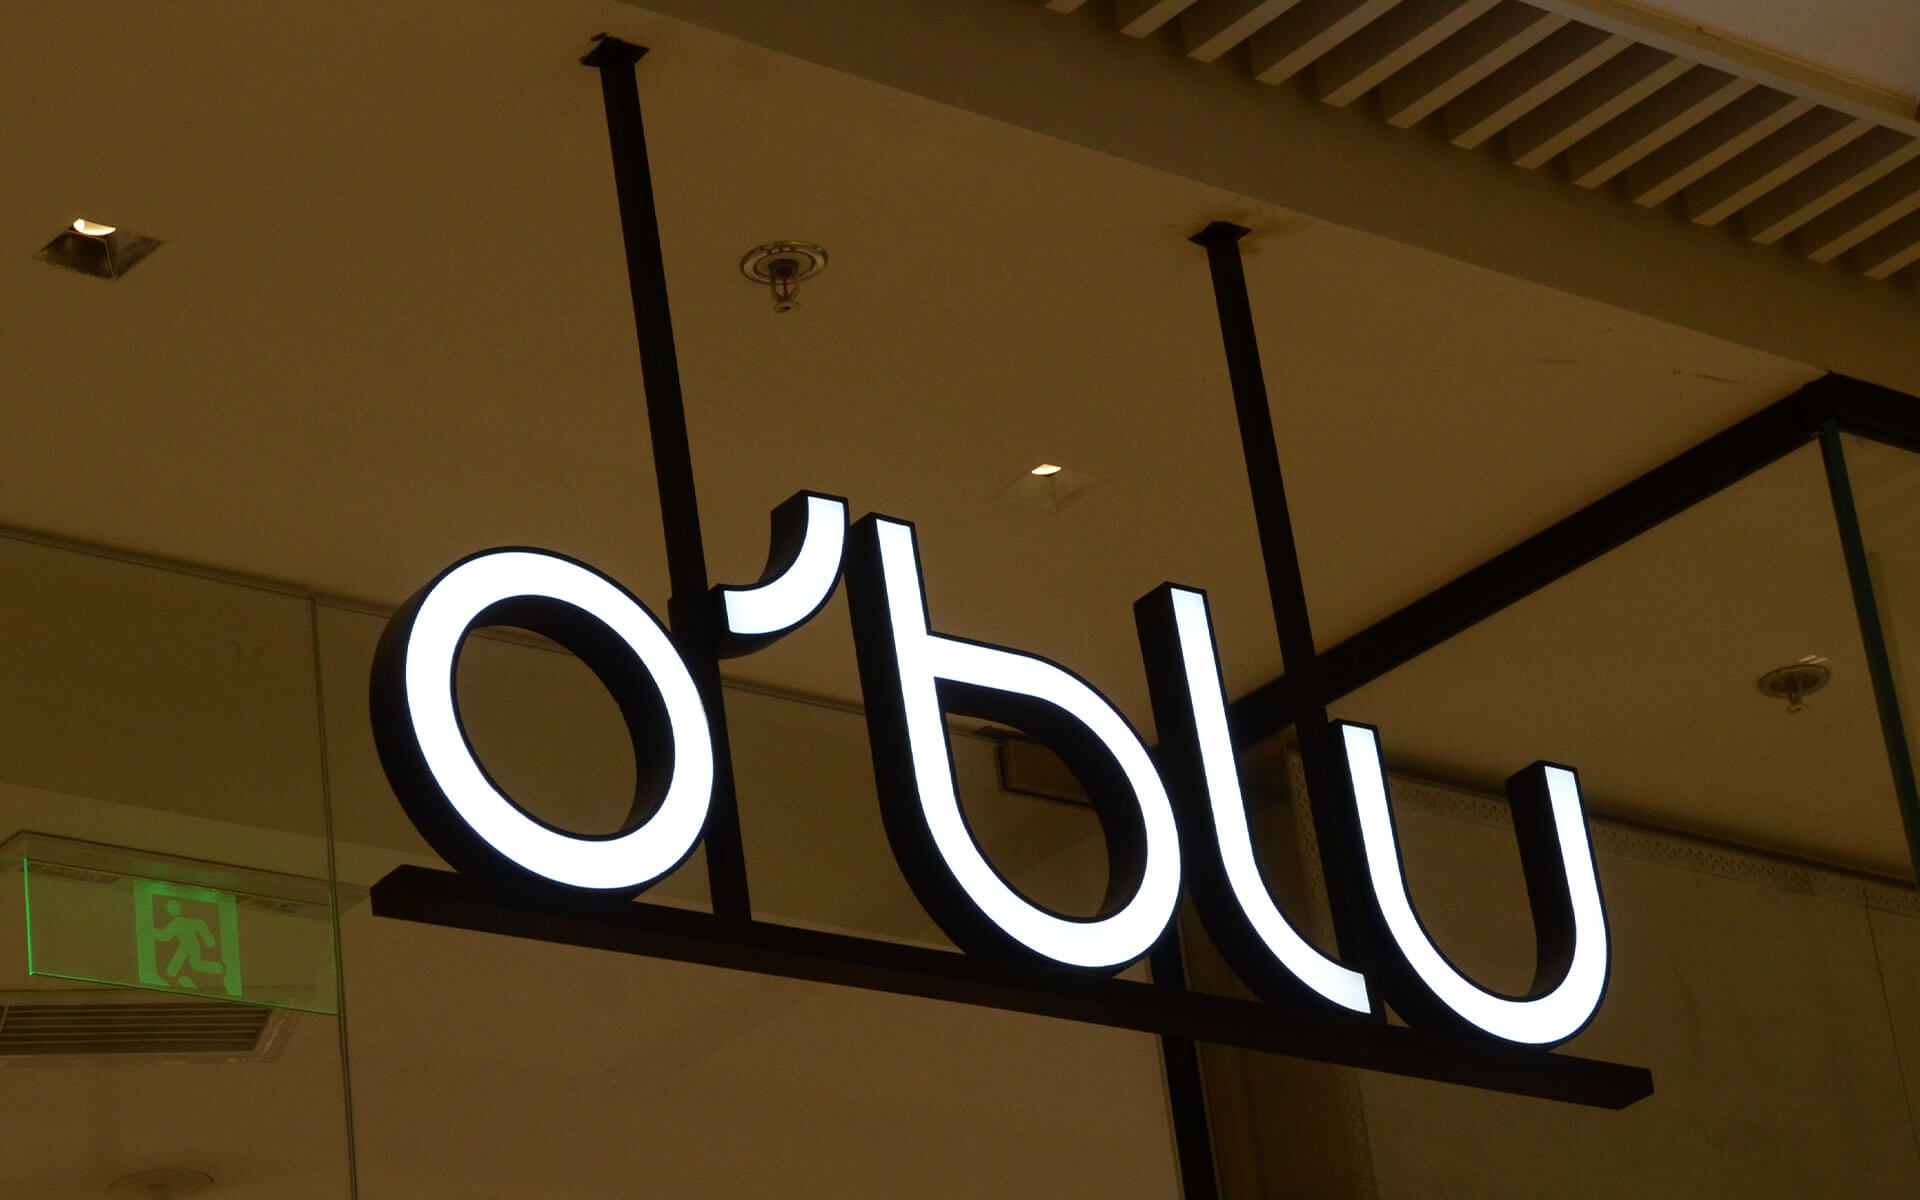 Trim Face-lit Metal Channel Letters for O'blu